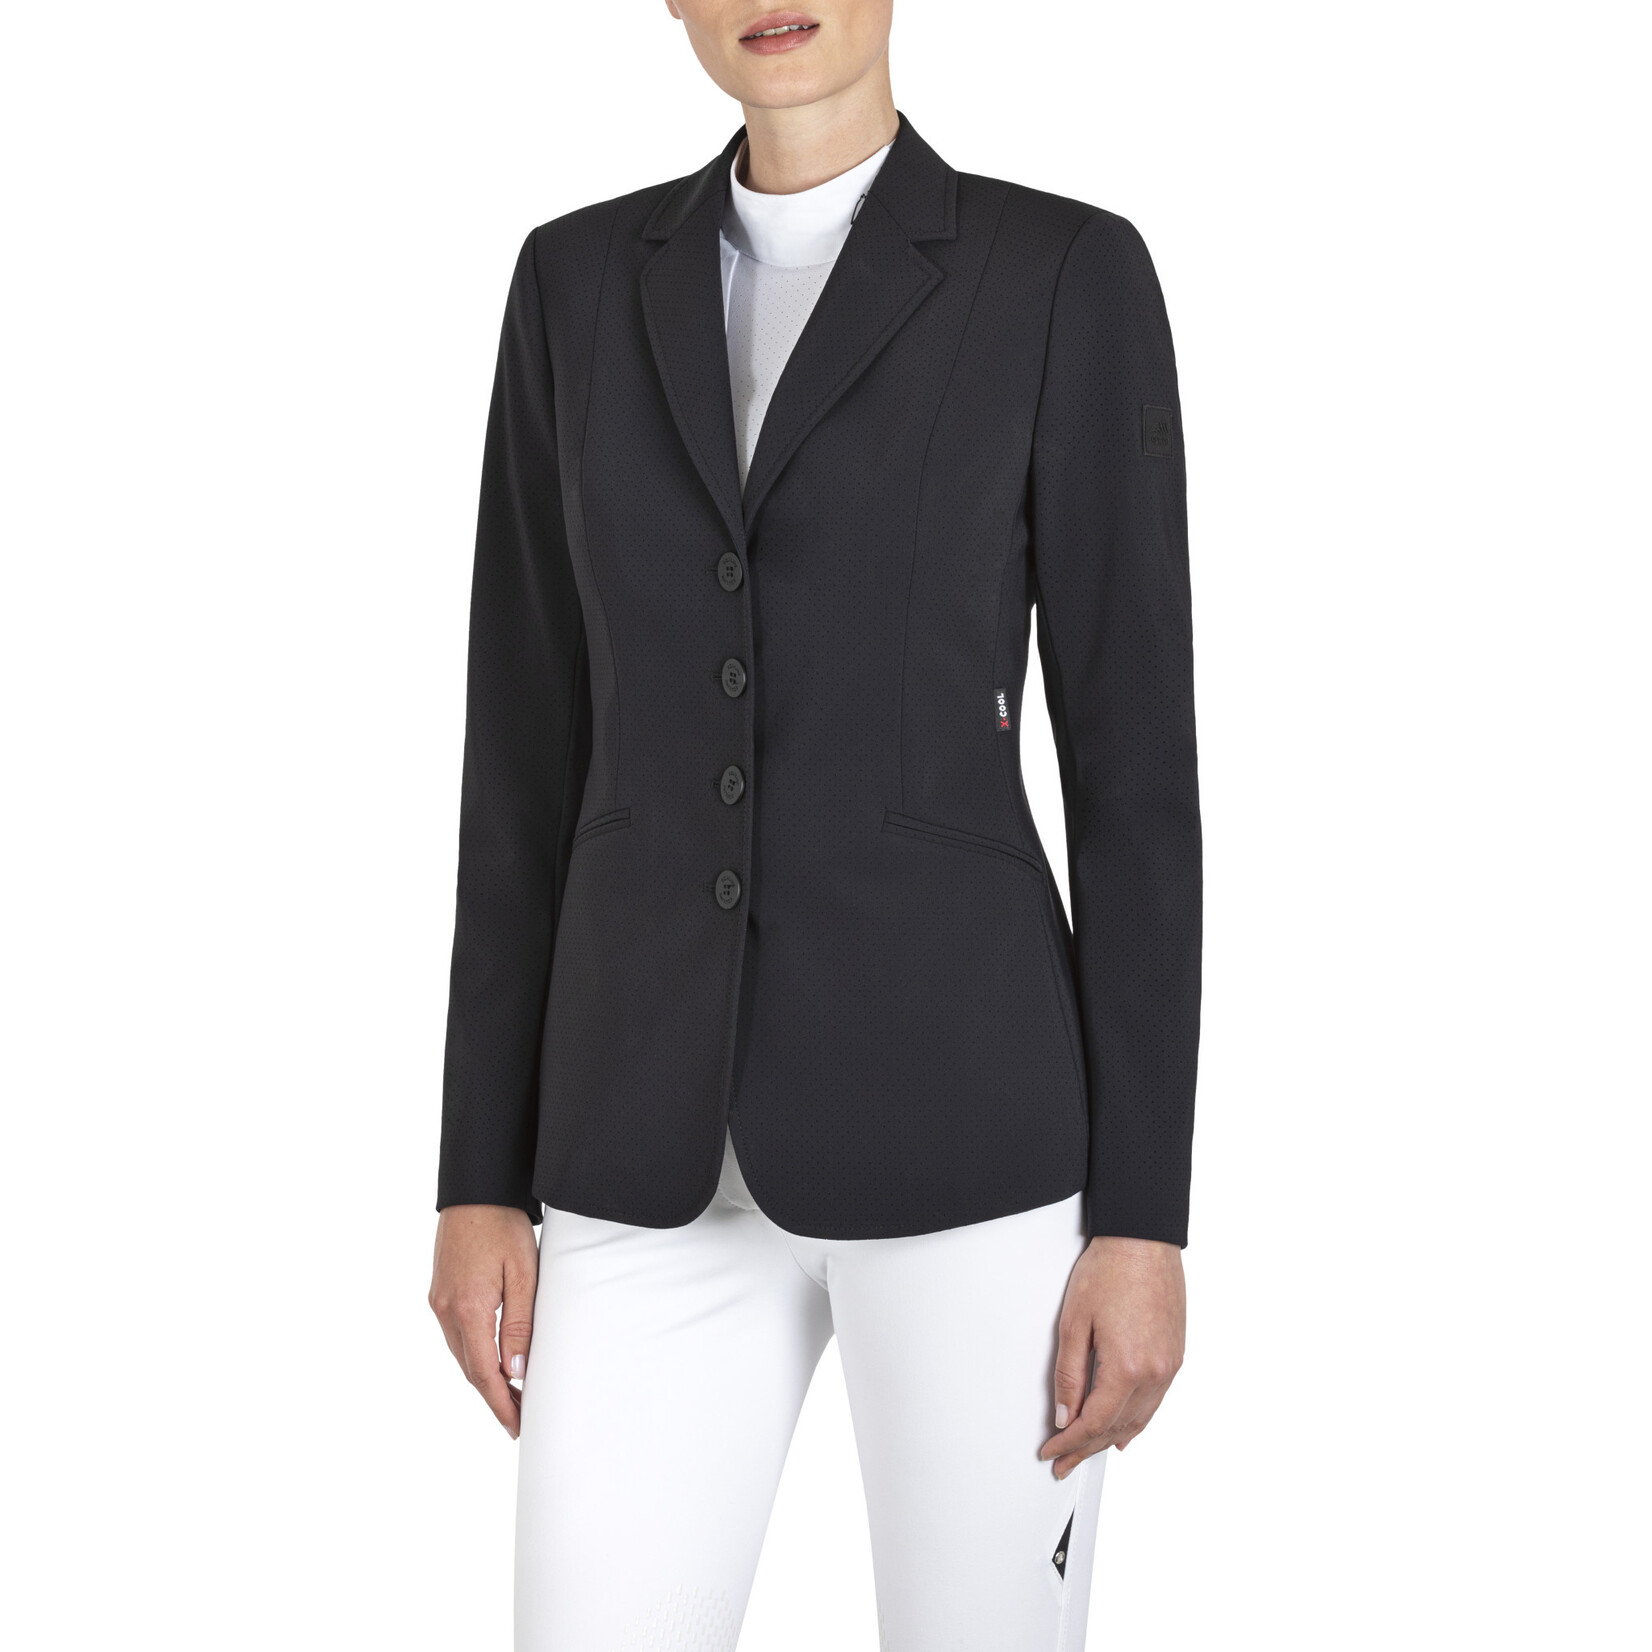 Equiline Equiline Caback Women's Micro Perforated Show Jacket